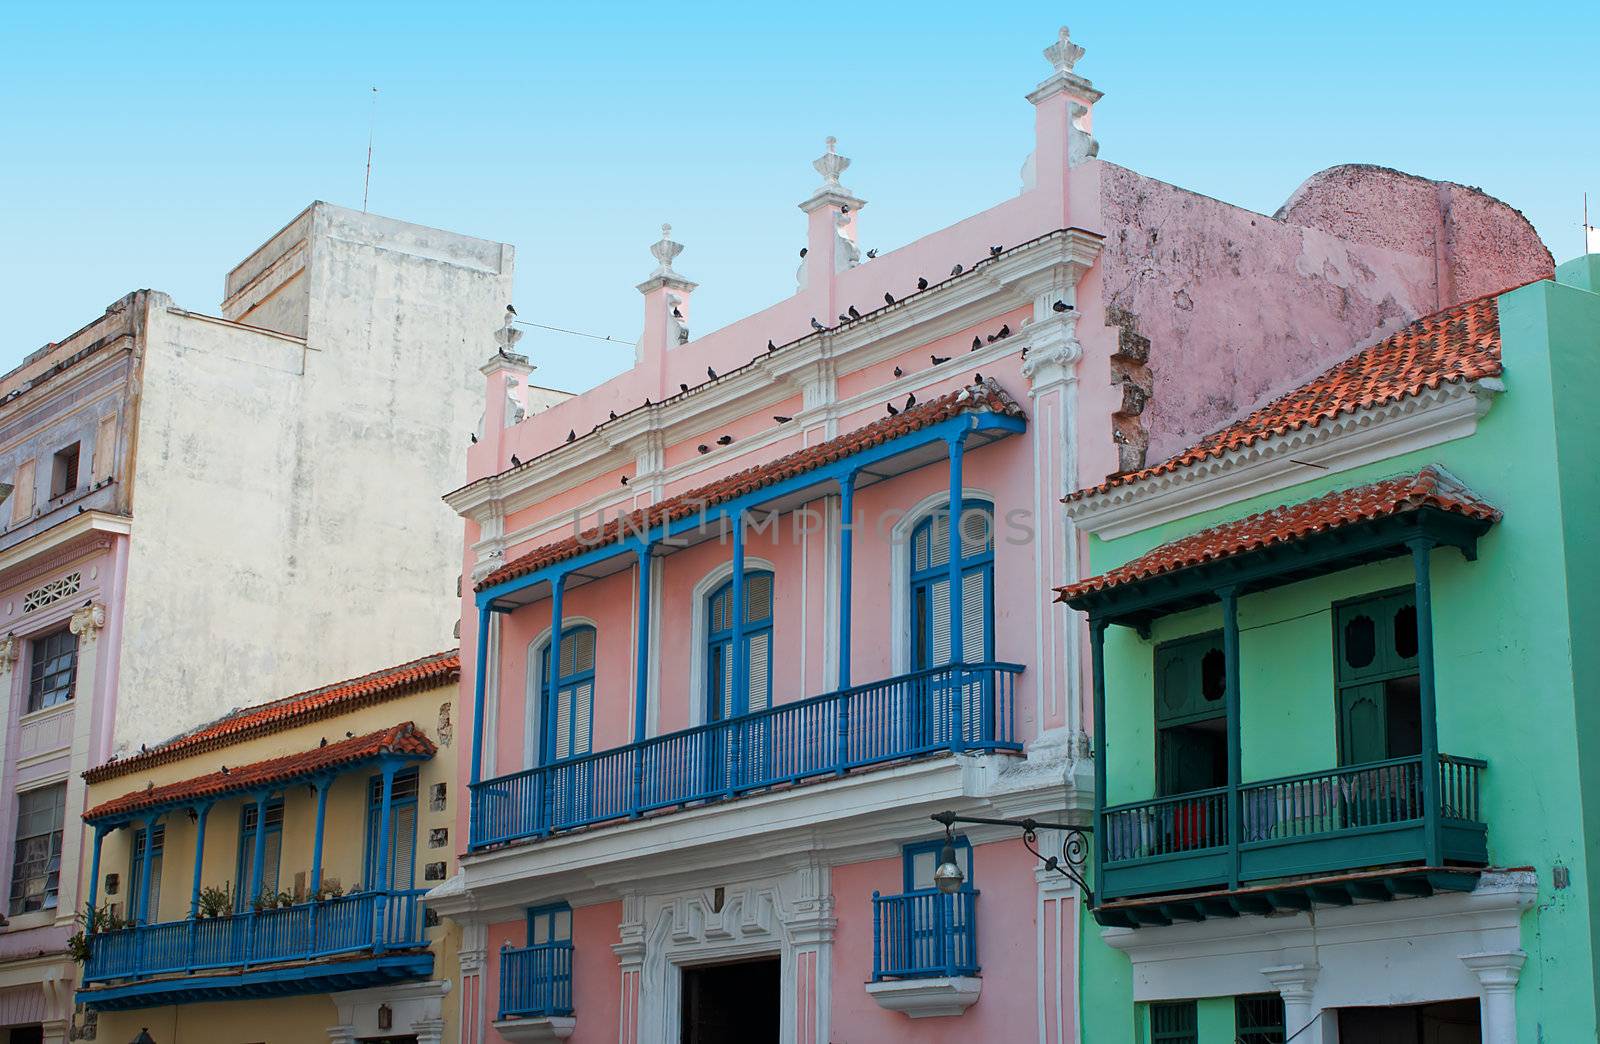 Row of old colorful houses in a colonial style